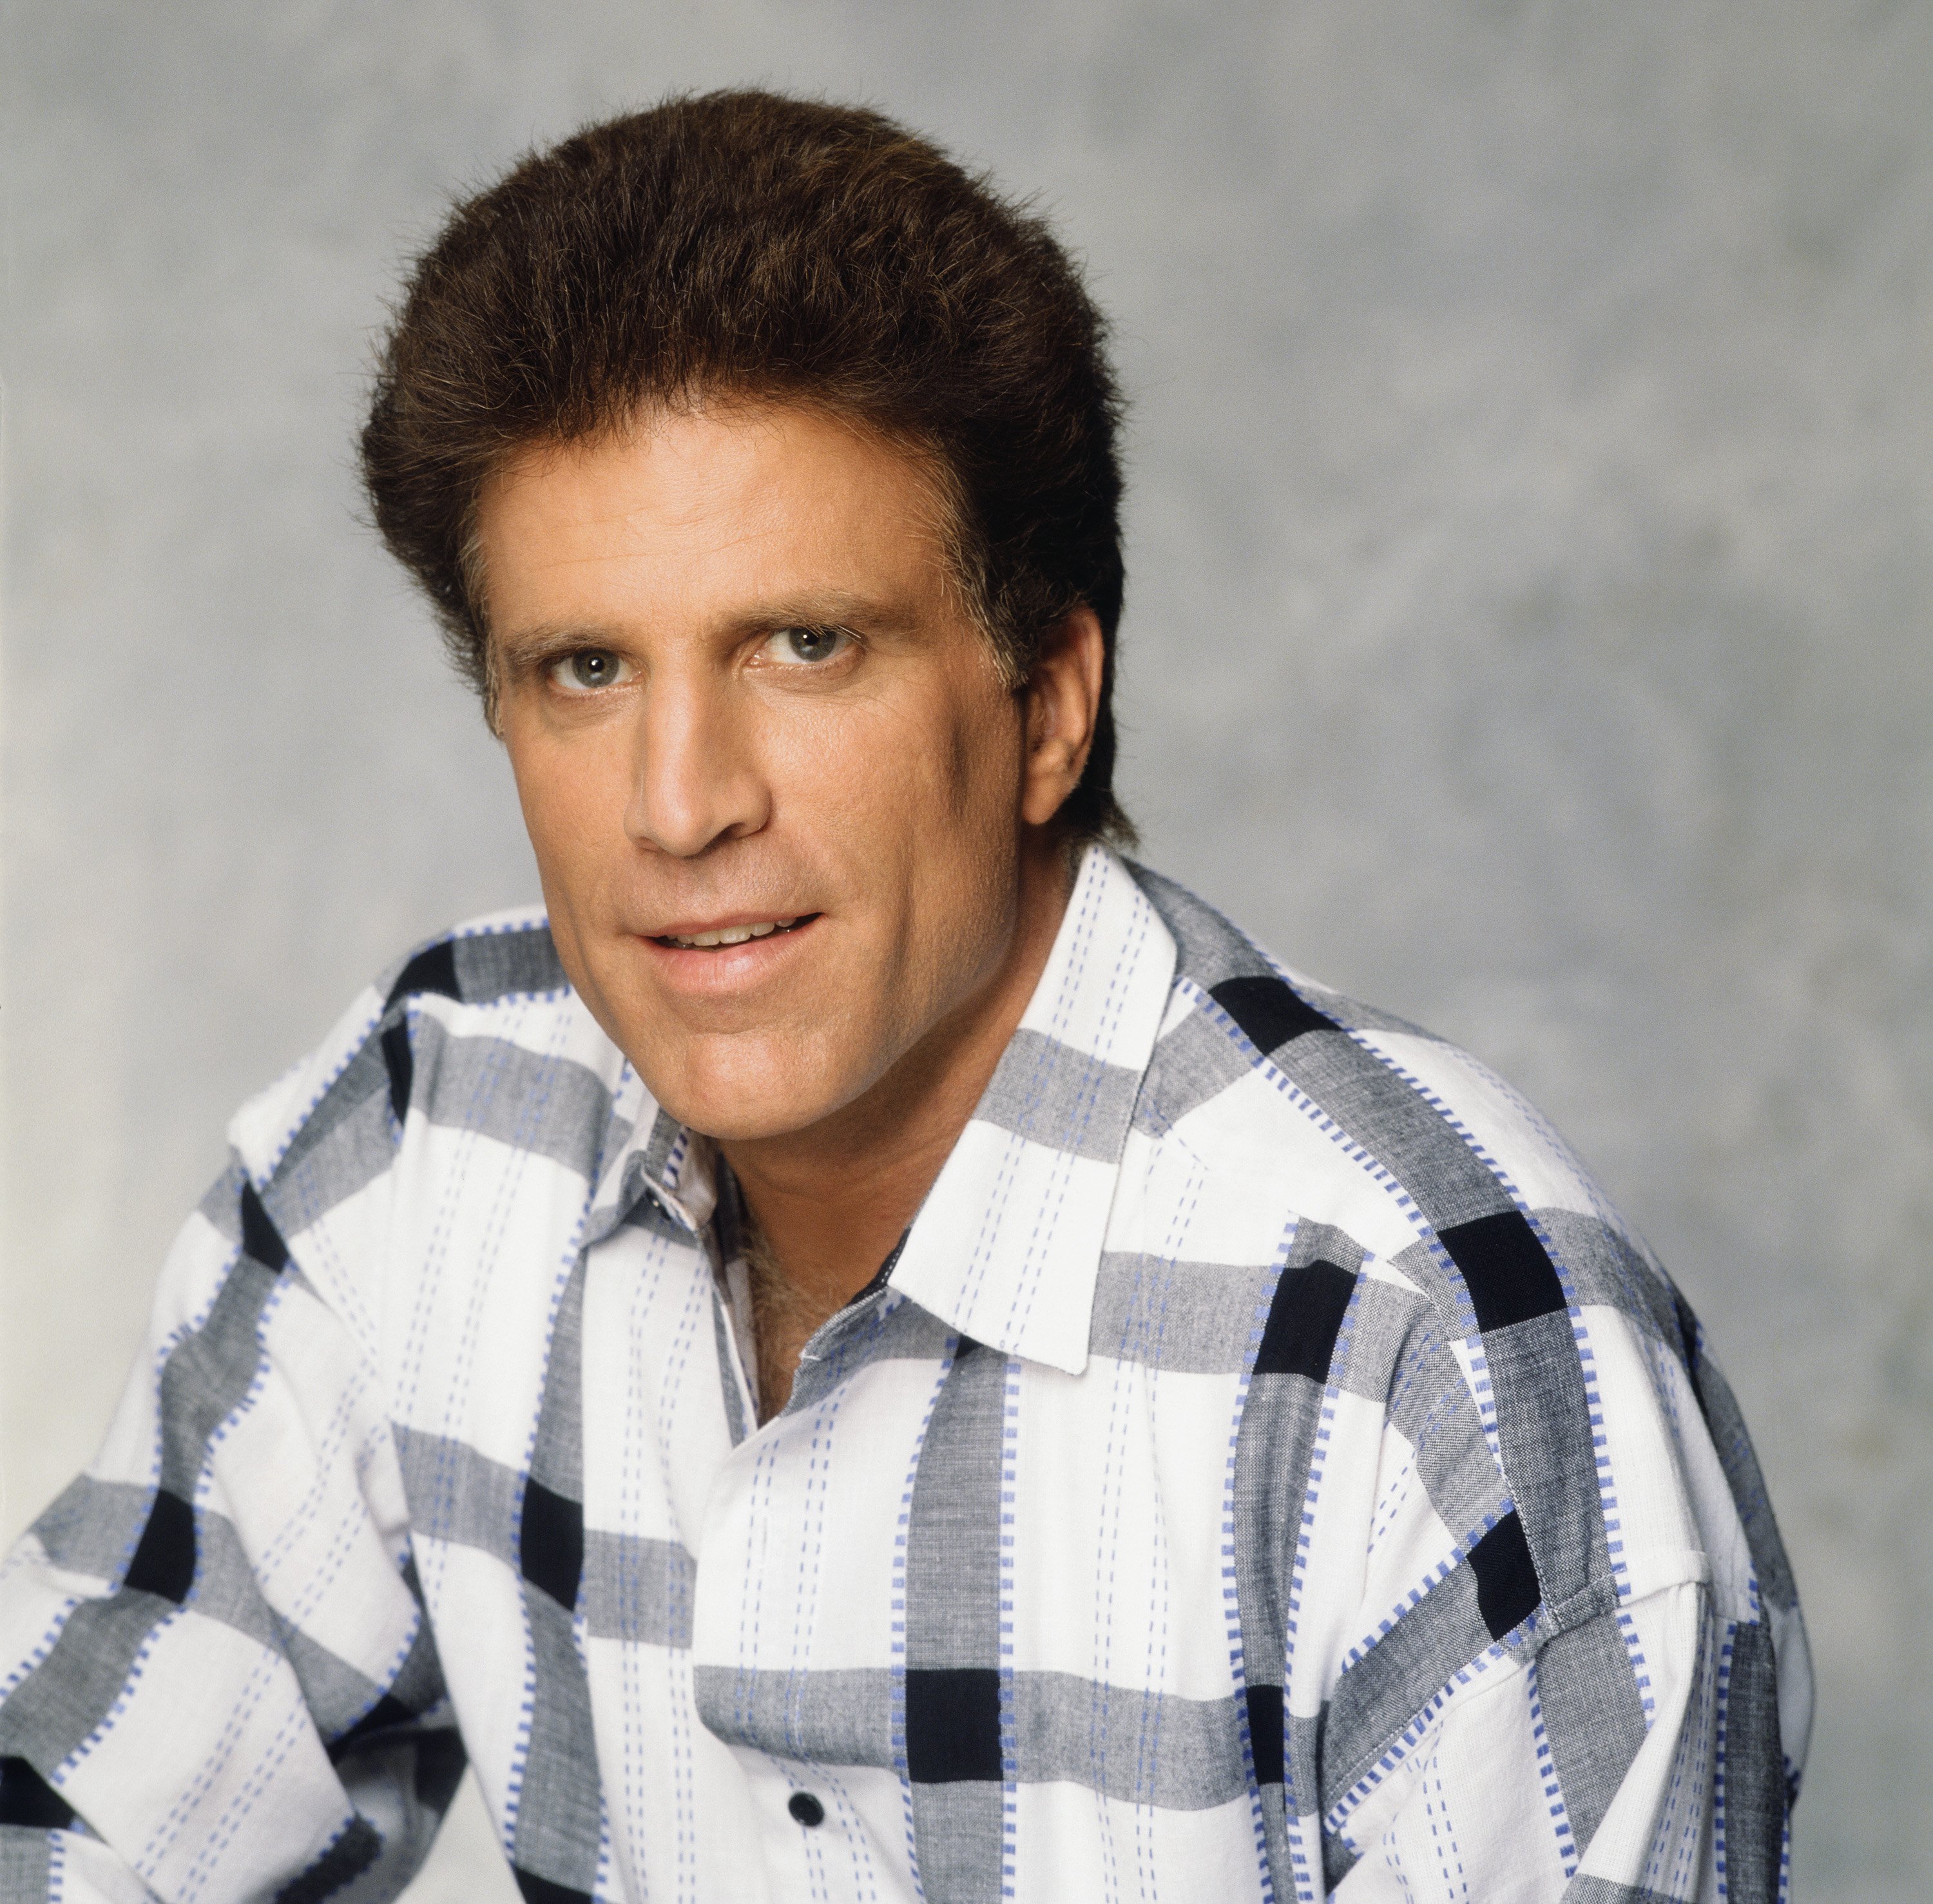 Actor Ted Danson as Sam Malone in the sitcom, "Cheers" during Season 7 on January 1, 1990.┃Source: Getty Images